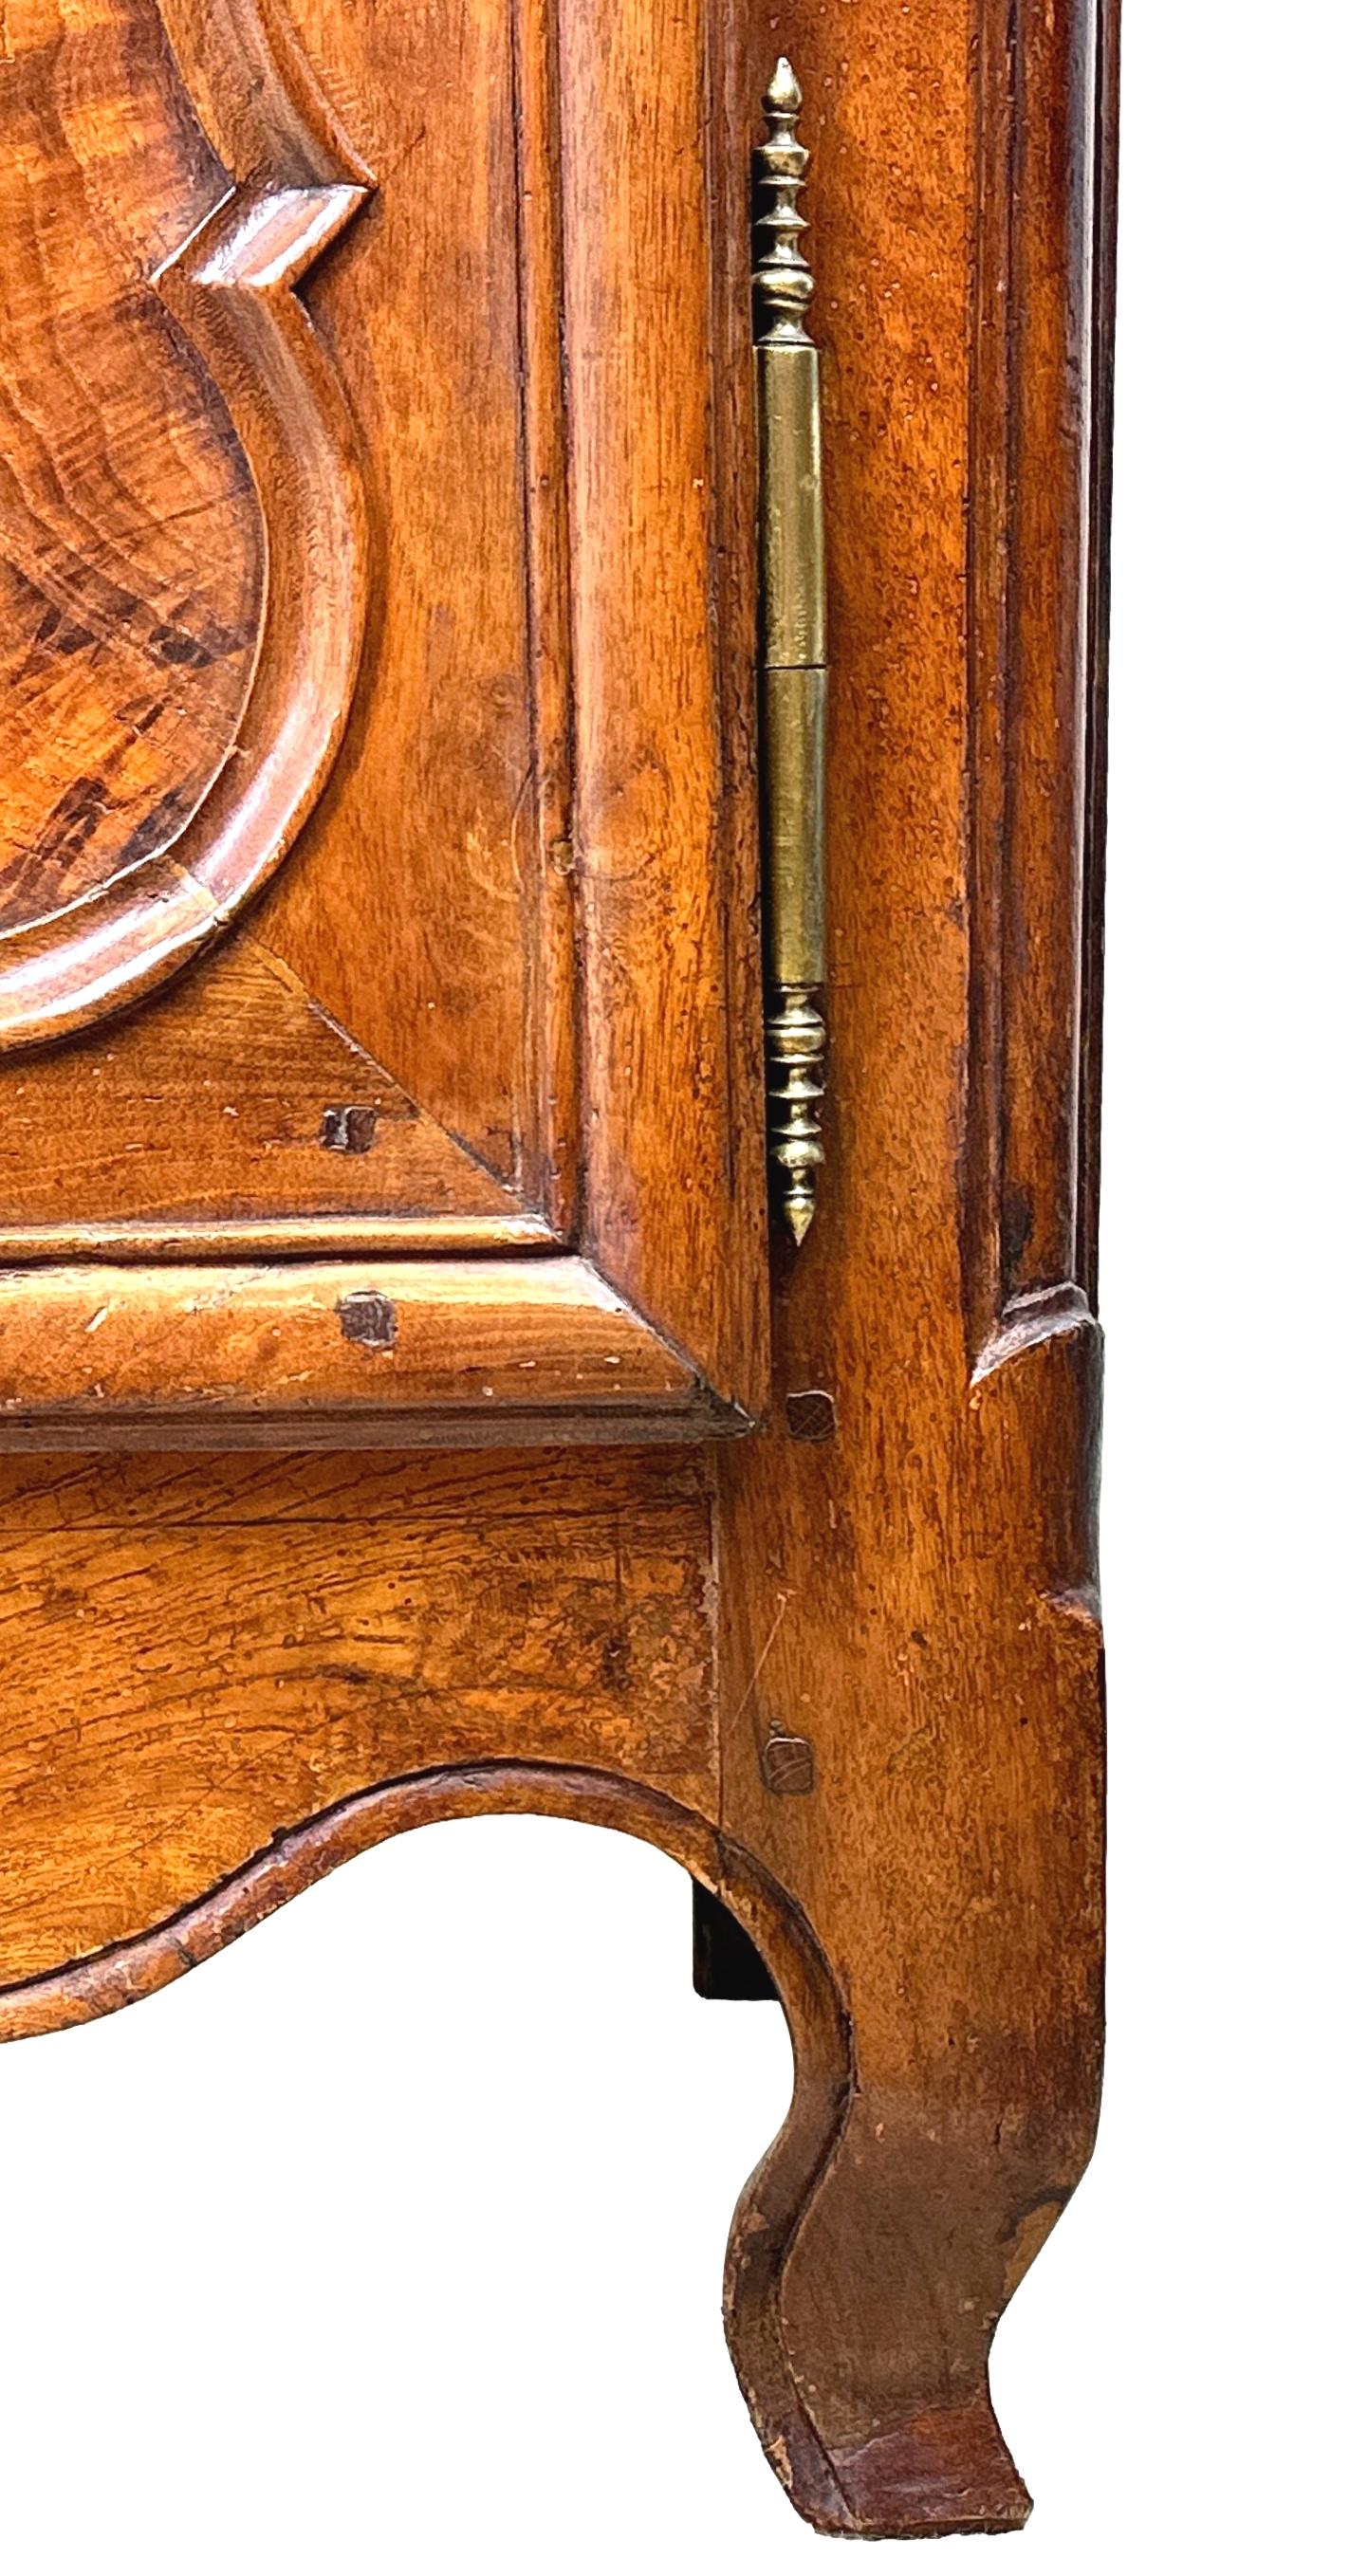 A Wonderful Early 19th Century French Provincial Cherry Wood Dresser, Or Cupboard, Having Well Figured Top With Cleated Ends, Over Three Frieze Drawers With Replacement Brass Handles And Attractive Moulded Panelled Doors, With Exceptional Figuring,